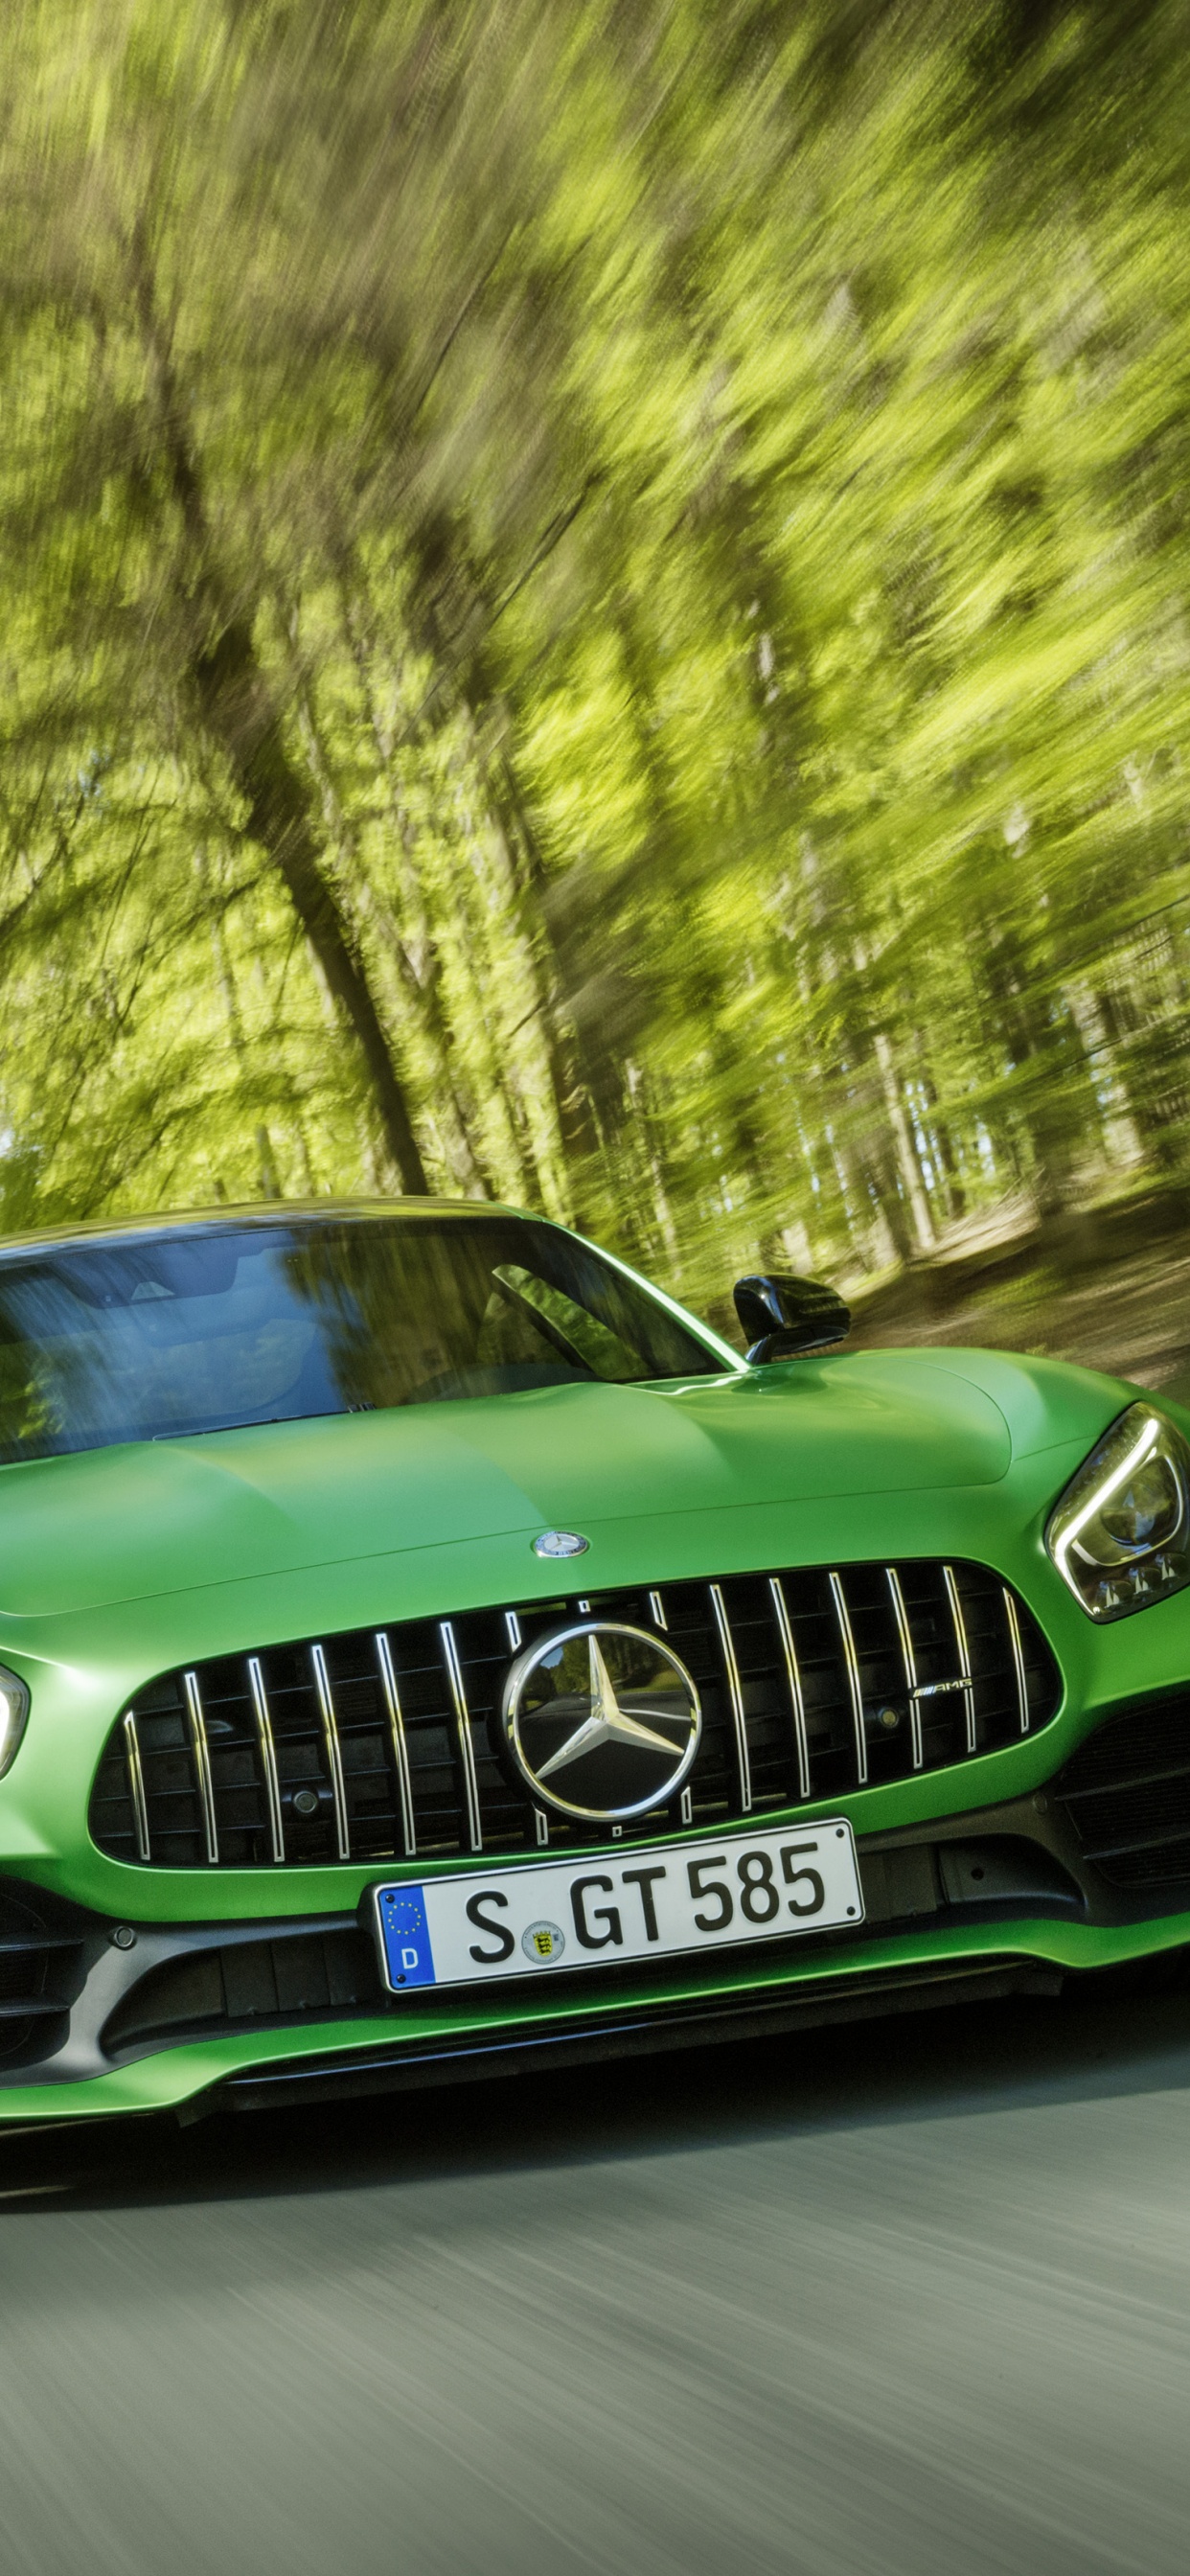 Green Mercedes Benz Car on Road During Daytime. Wallpaper in 1242x2688 Resolution